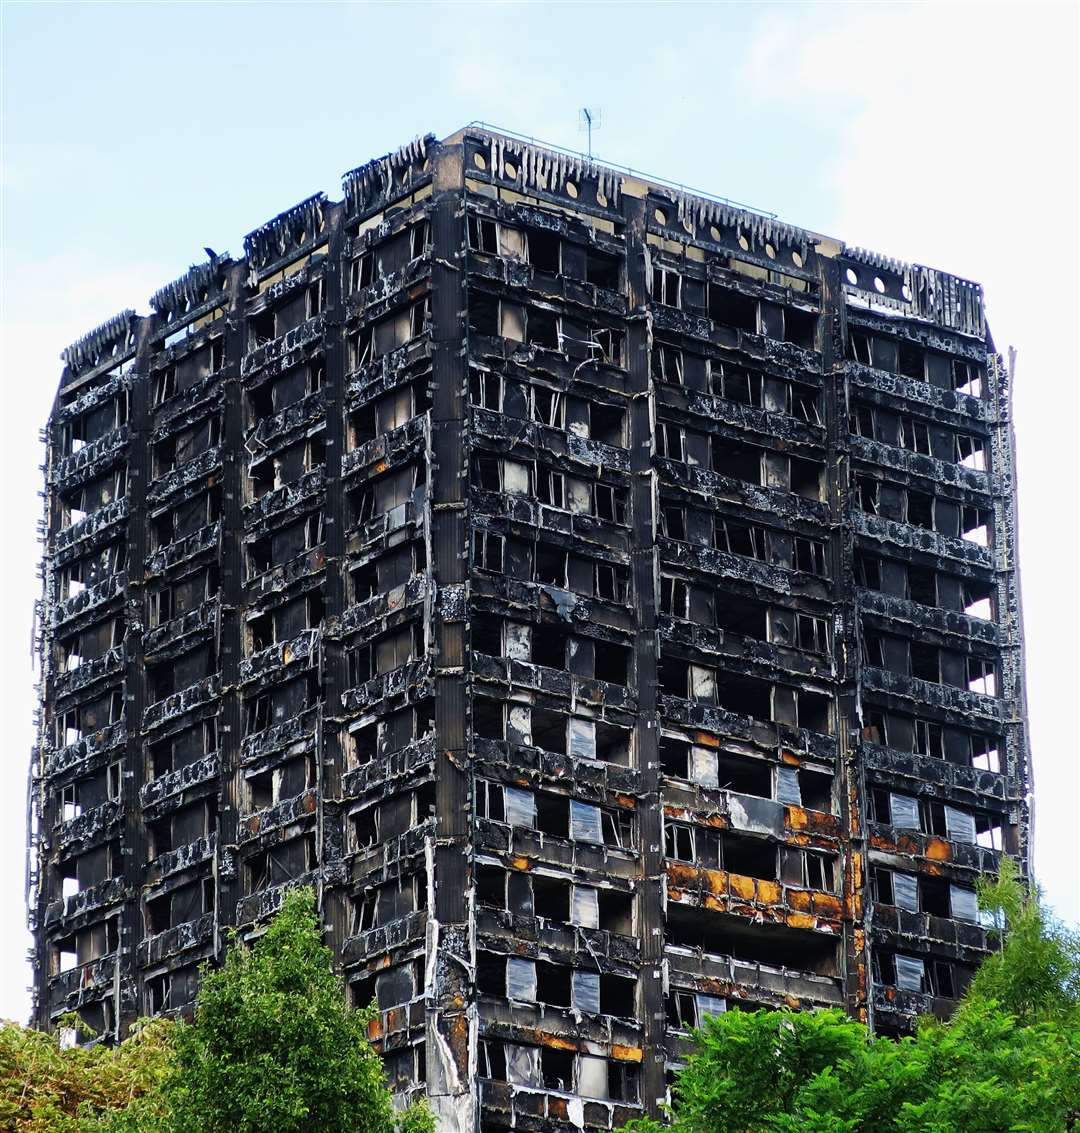 The remains of Grenfell Tower following the fire in June 2017 Picture: iStock/ Alex Donohue